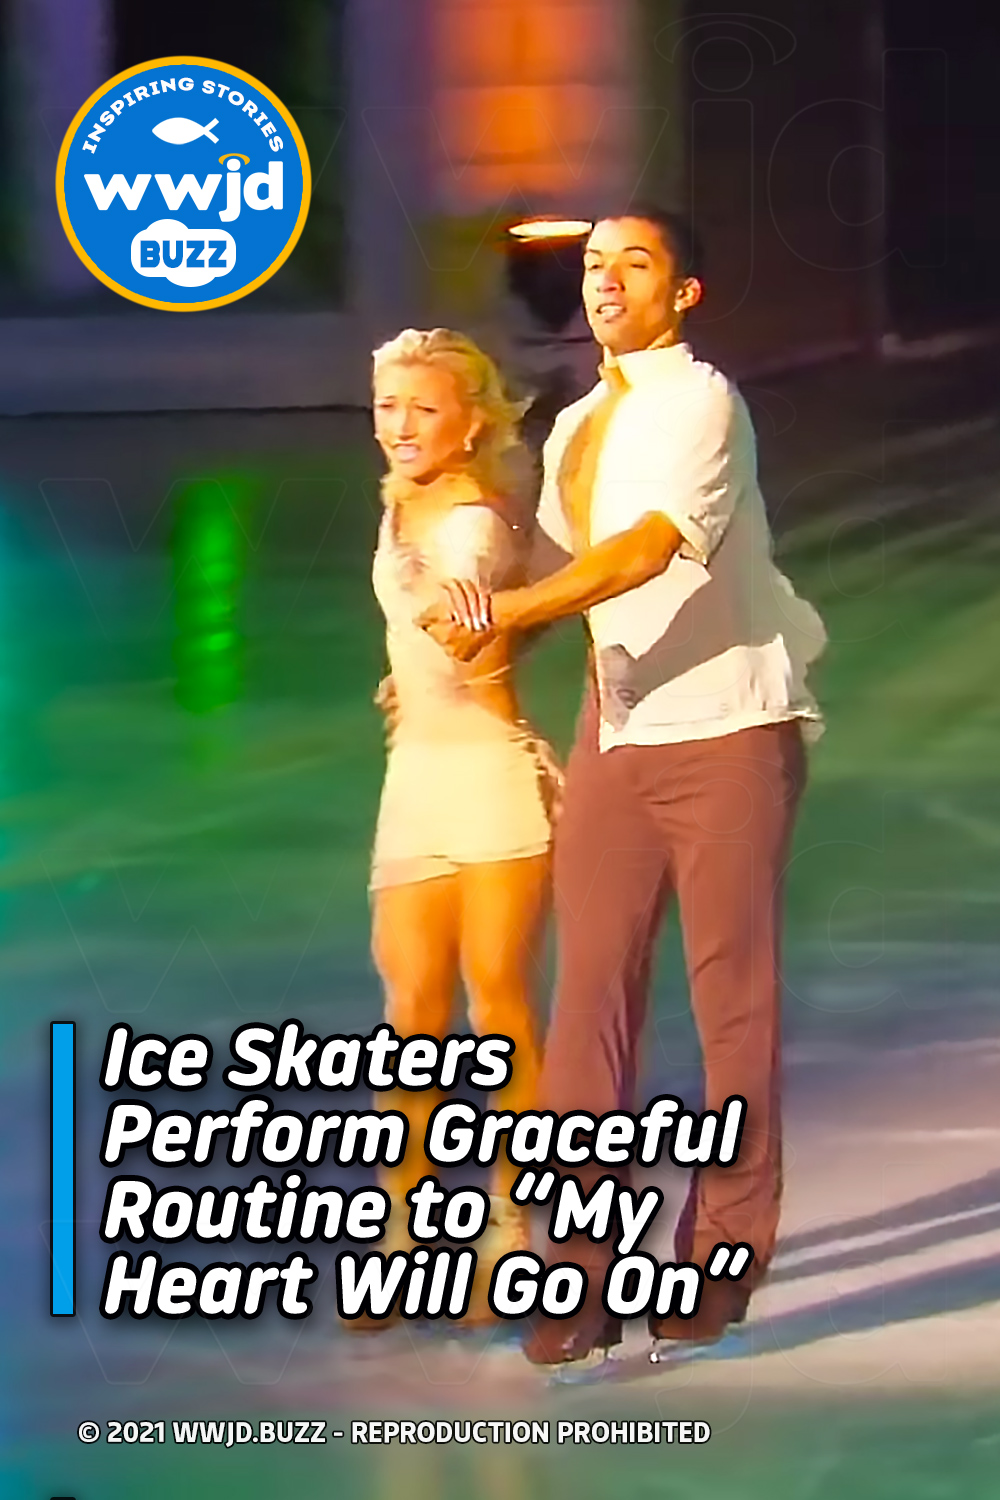 Ice Skaters Perform Graceful Routine to “My Heart Will Go On”